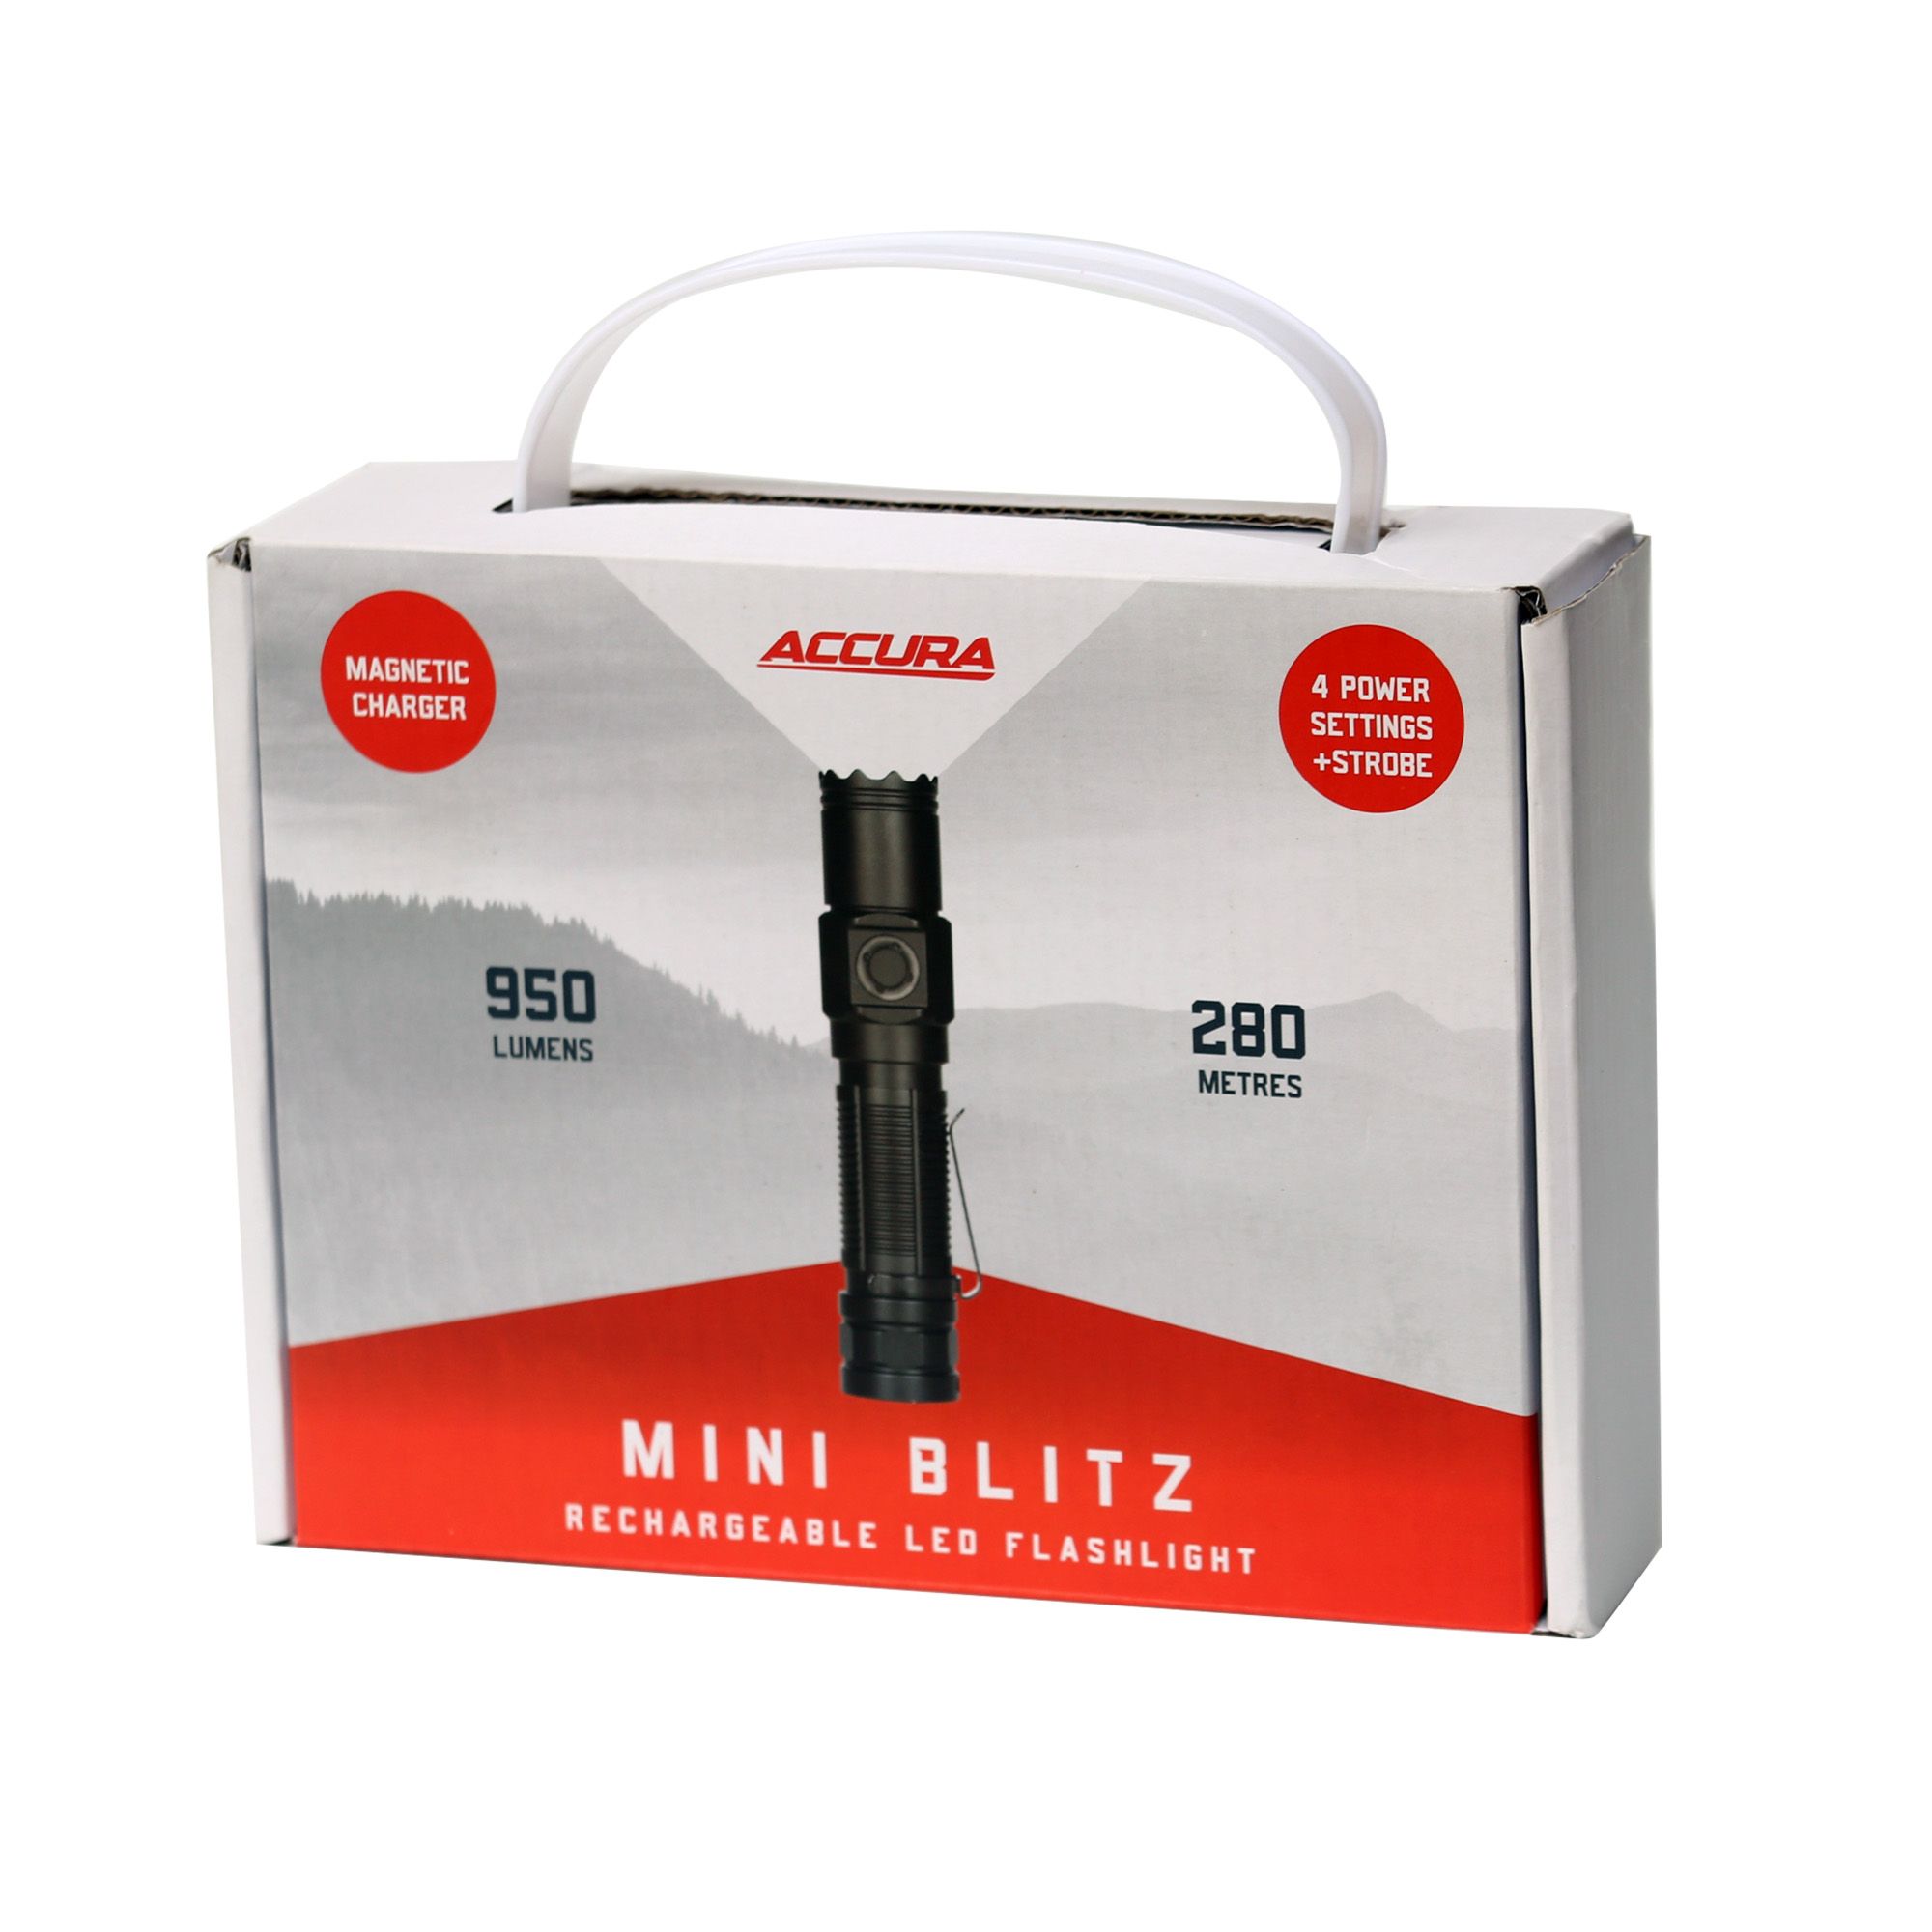 Accura Mini Blitz LED Torch 950 LM battery & Charger